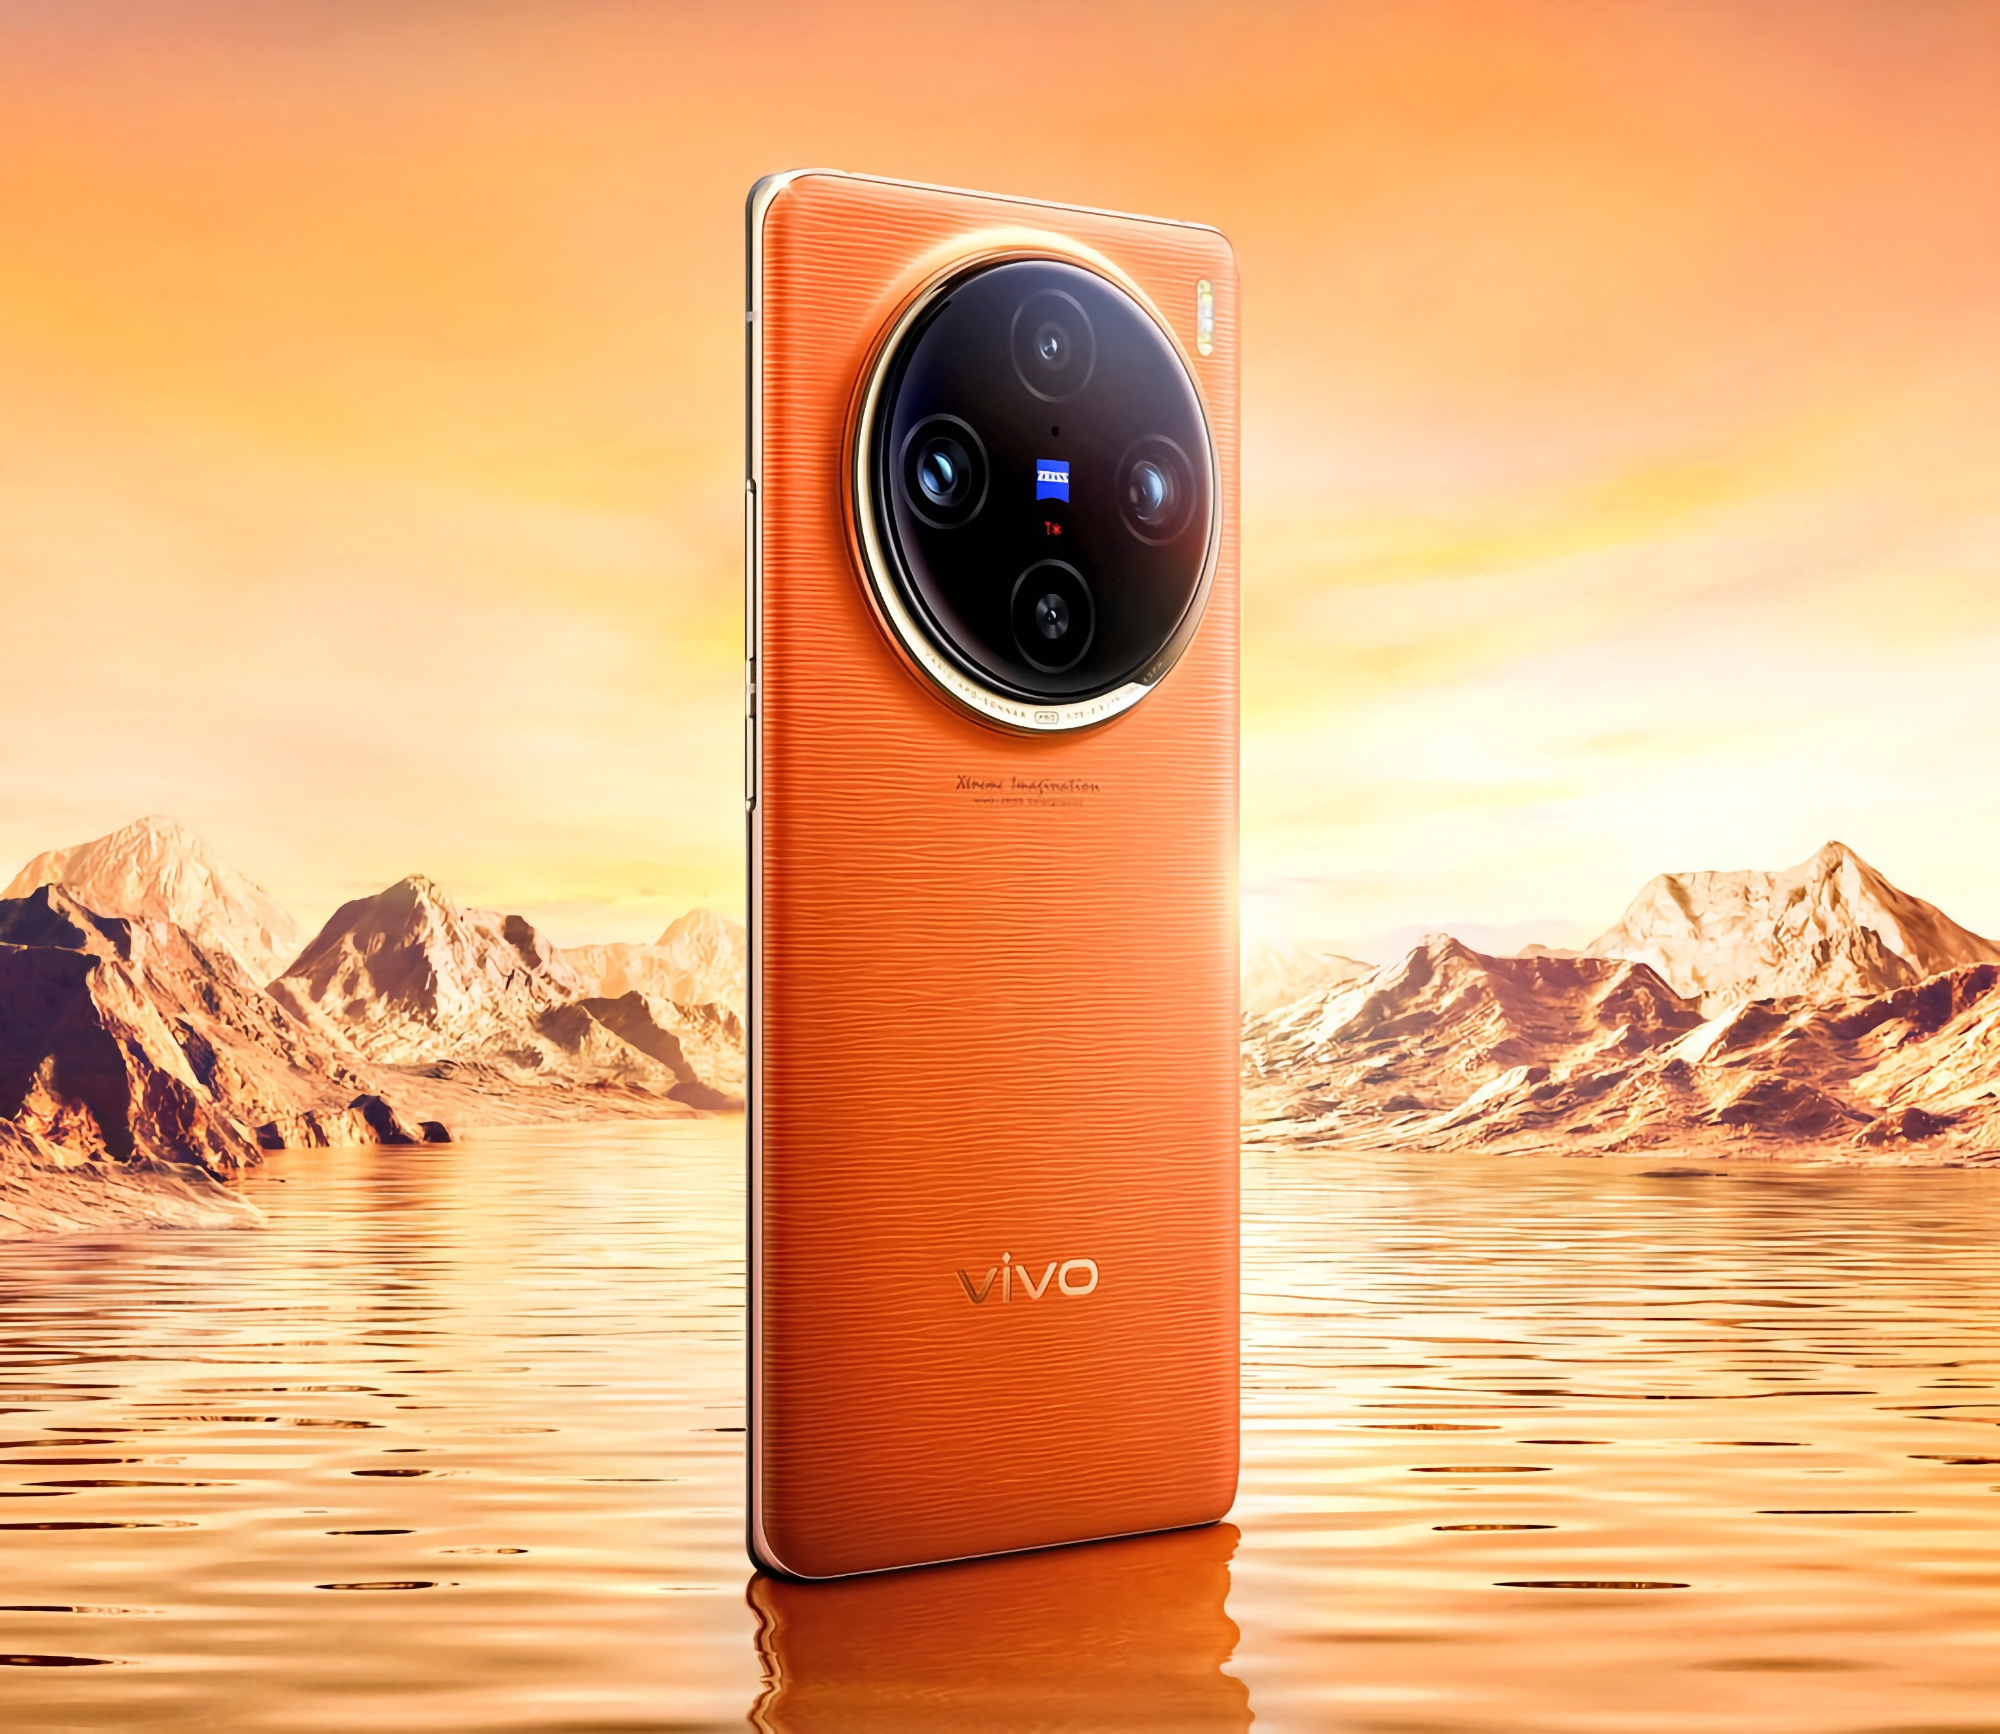 Without waiting for the presentation: vivo showed how the vivo X100 flagship will look like with ZEISS camera